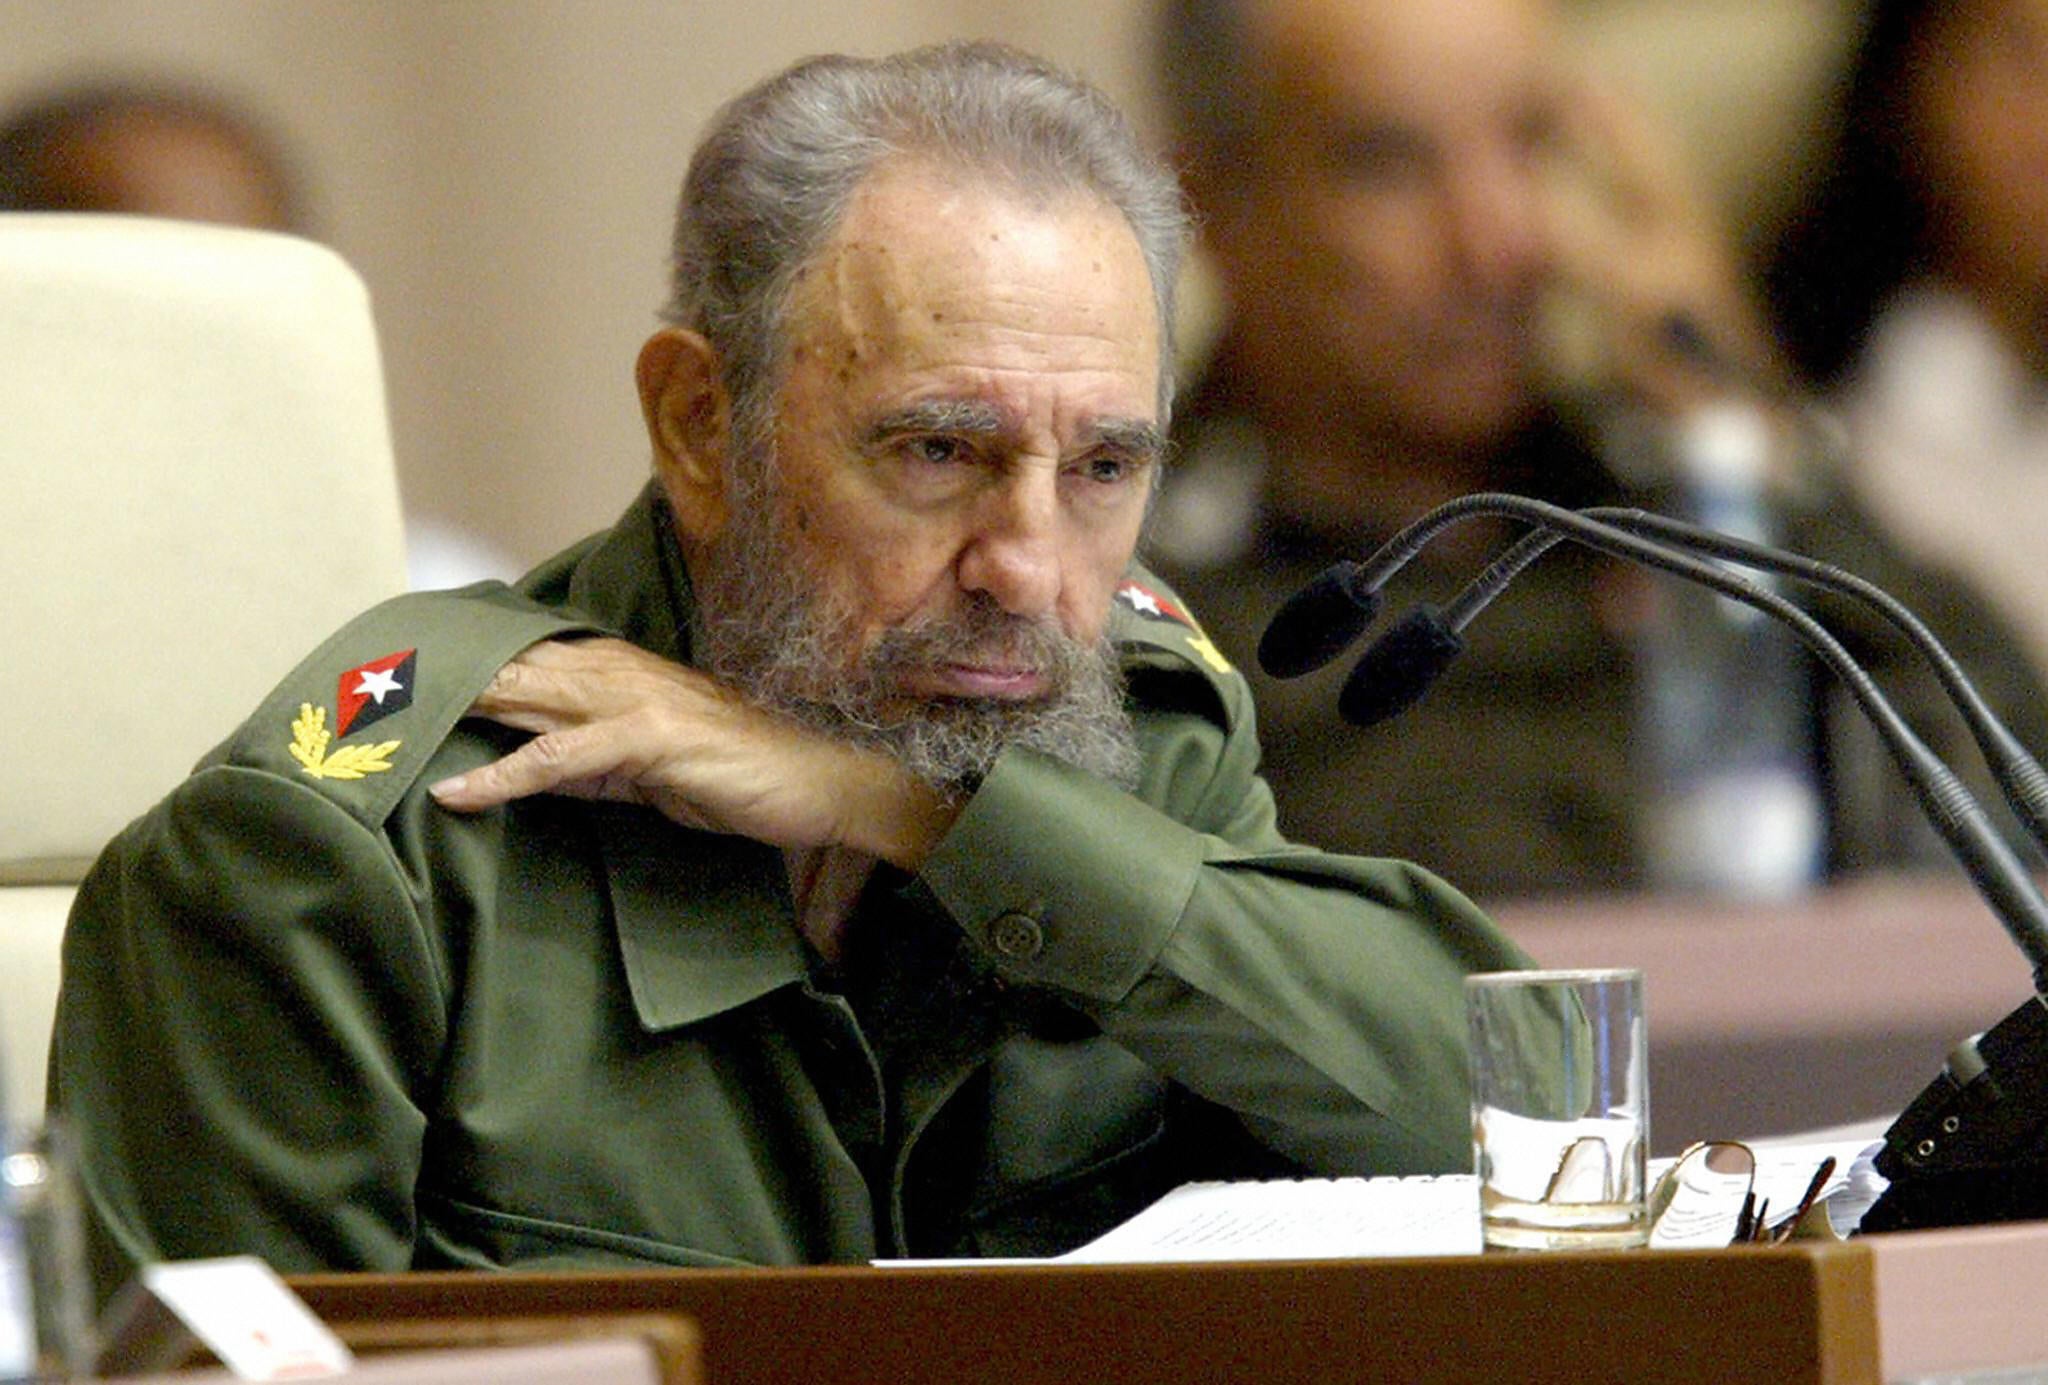 Fidel Castro, pictured in 2005, invariably wore his uniform when appearing in public